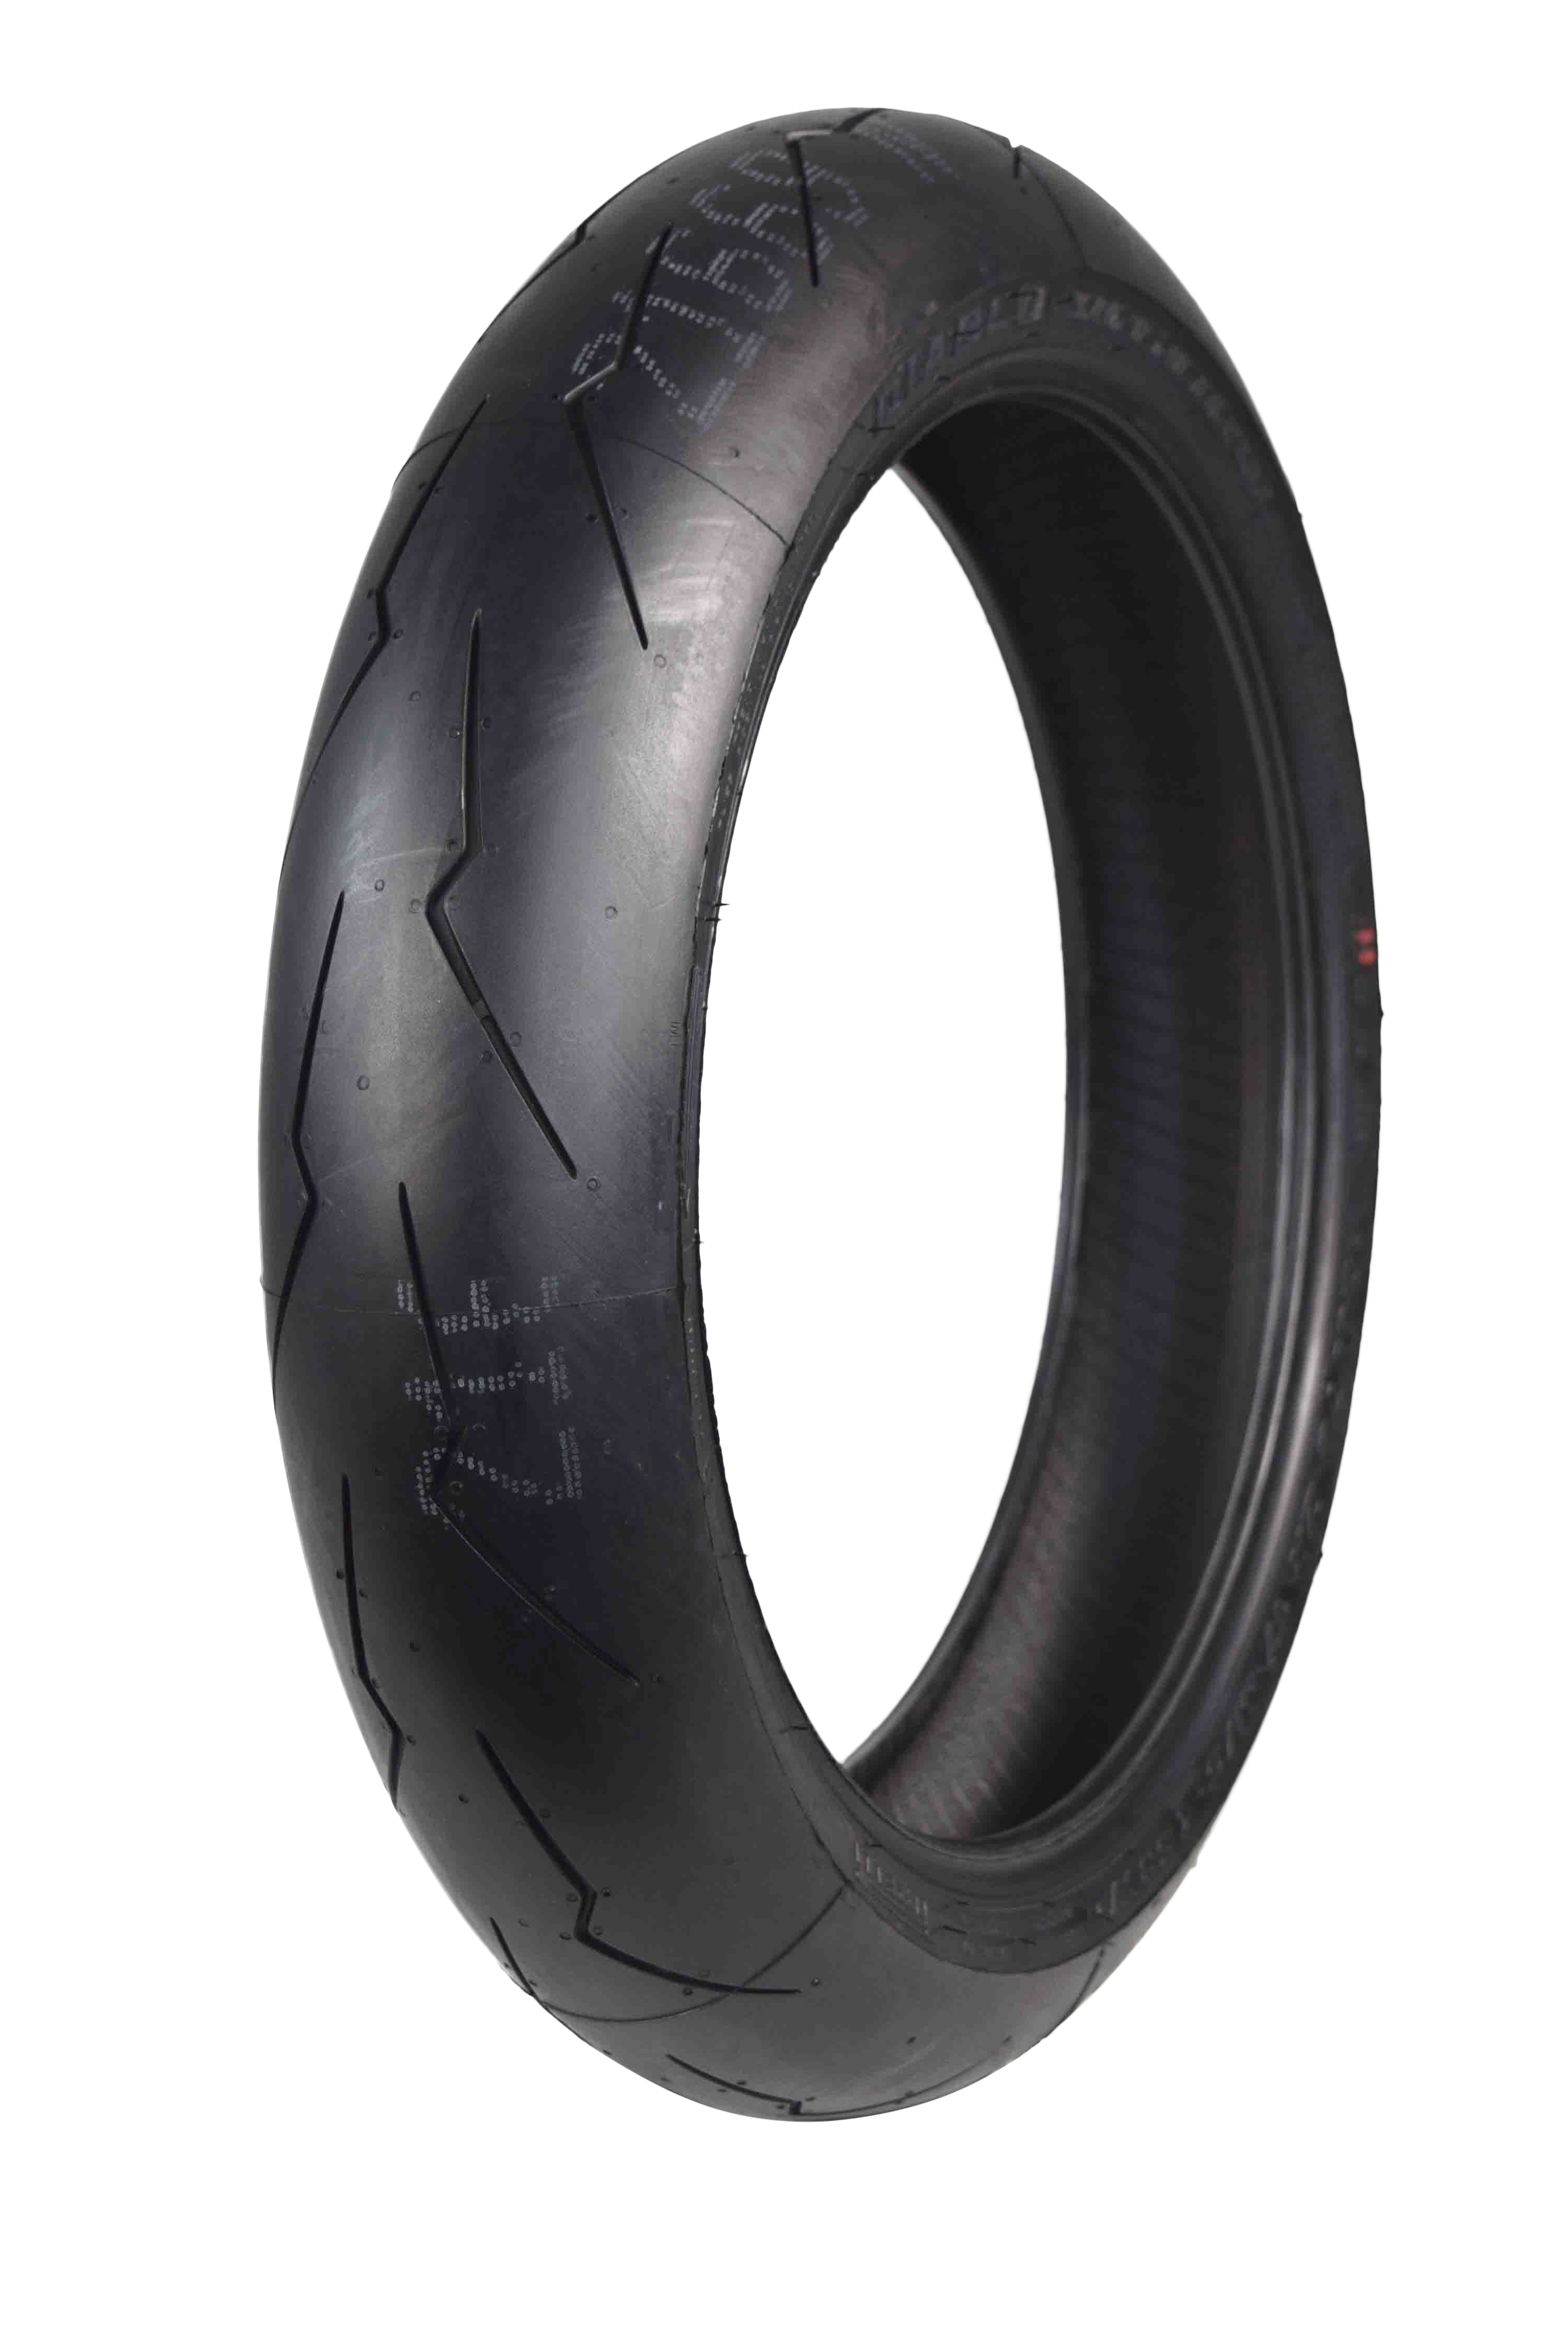 Pirelli-Tire-120-70ZR17-SUPER-CORSA-V2-Radial-Motorcycle-Front-Tire-120-70-17-image-2